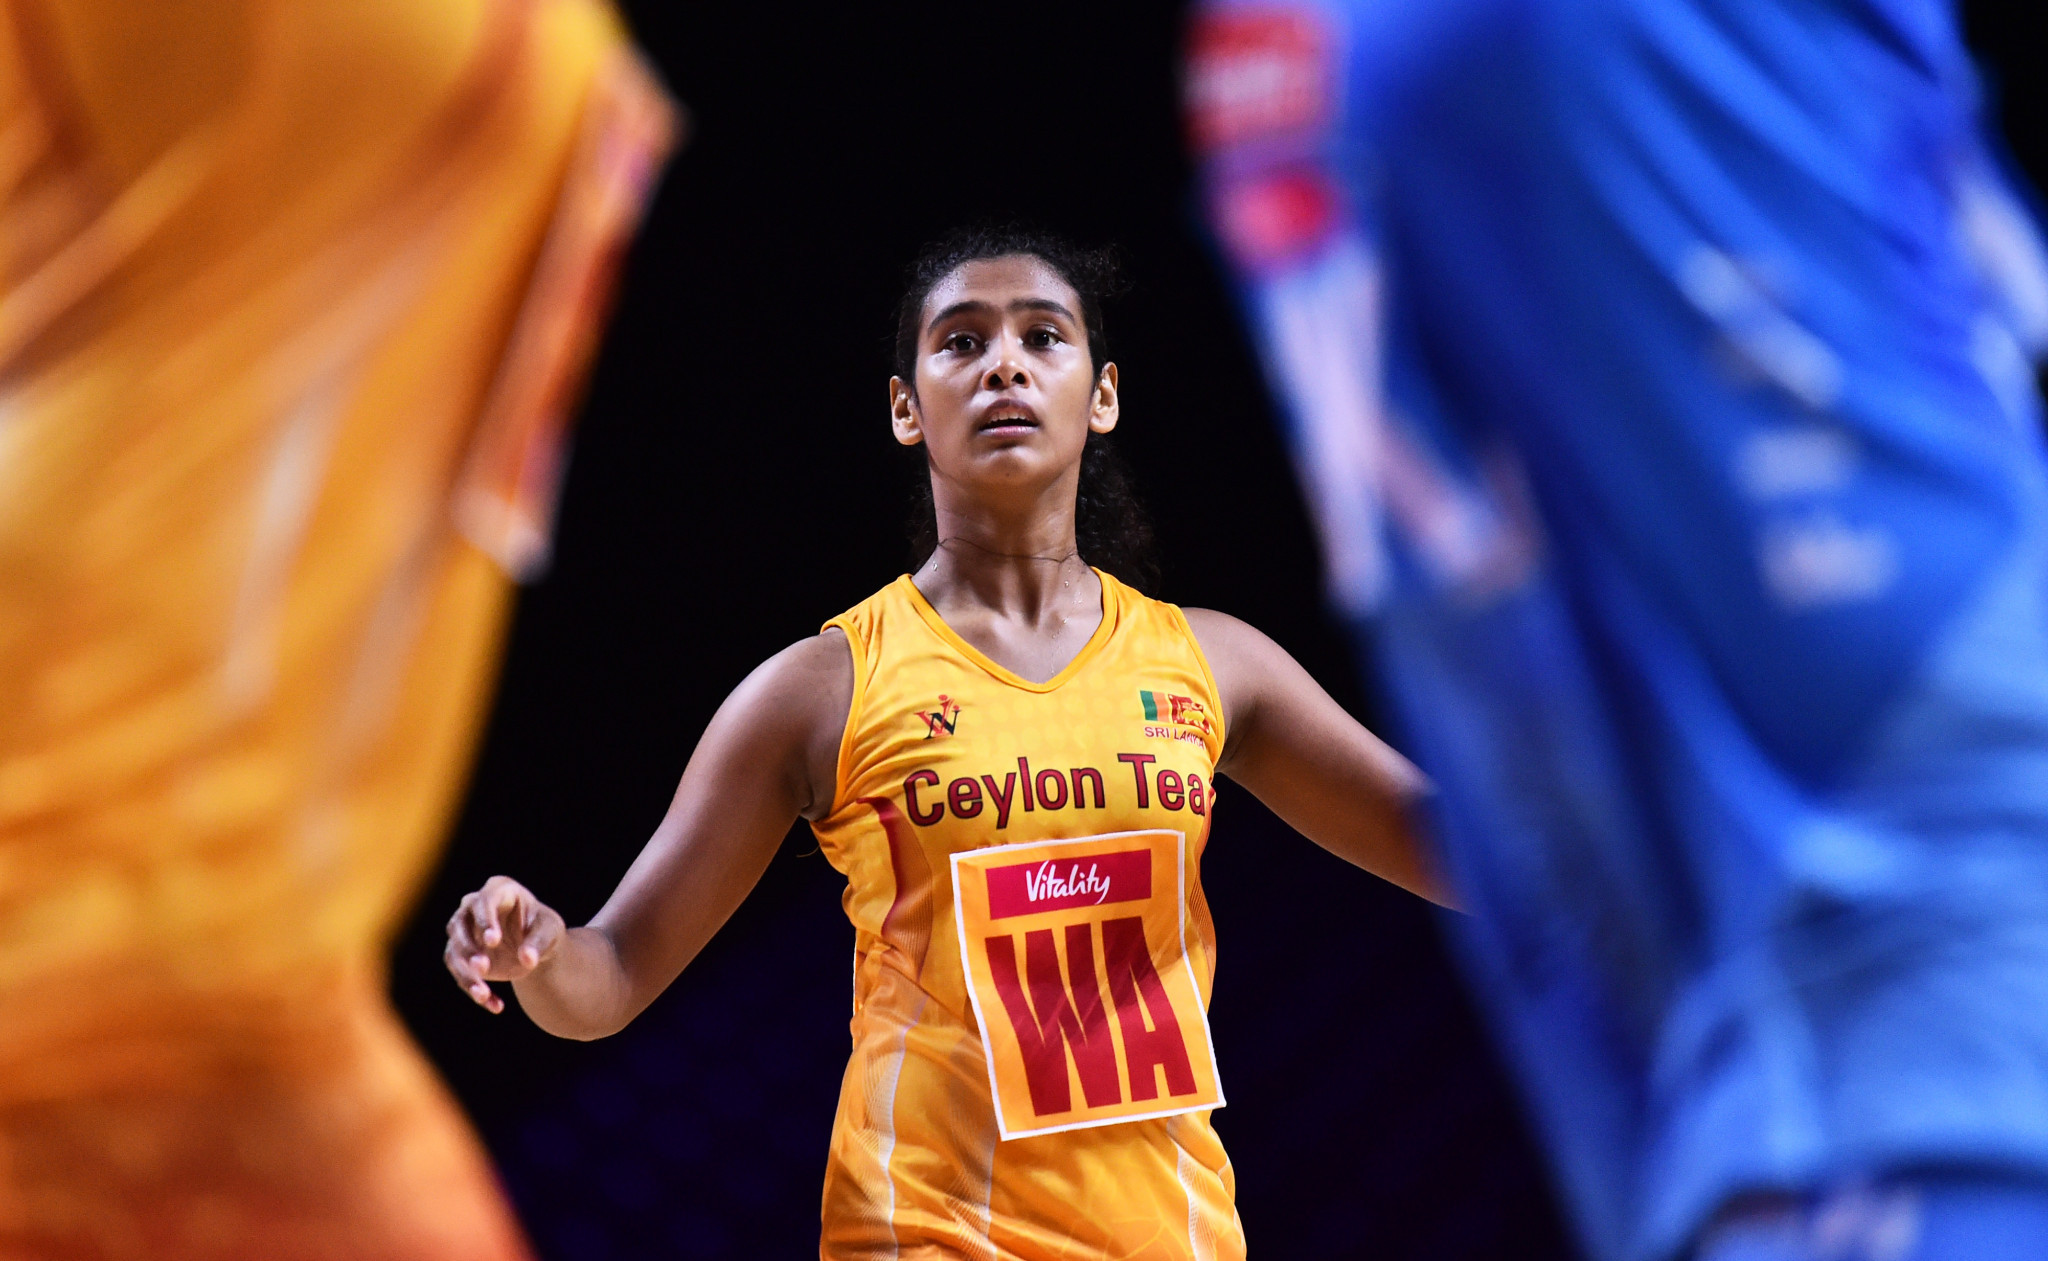 Sri Lanka claimed its sixth title today at the Asian Netball Championships ©Getty Images